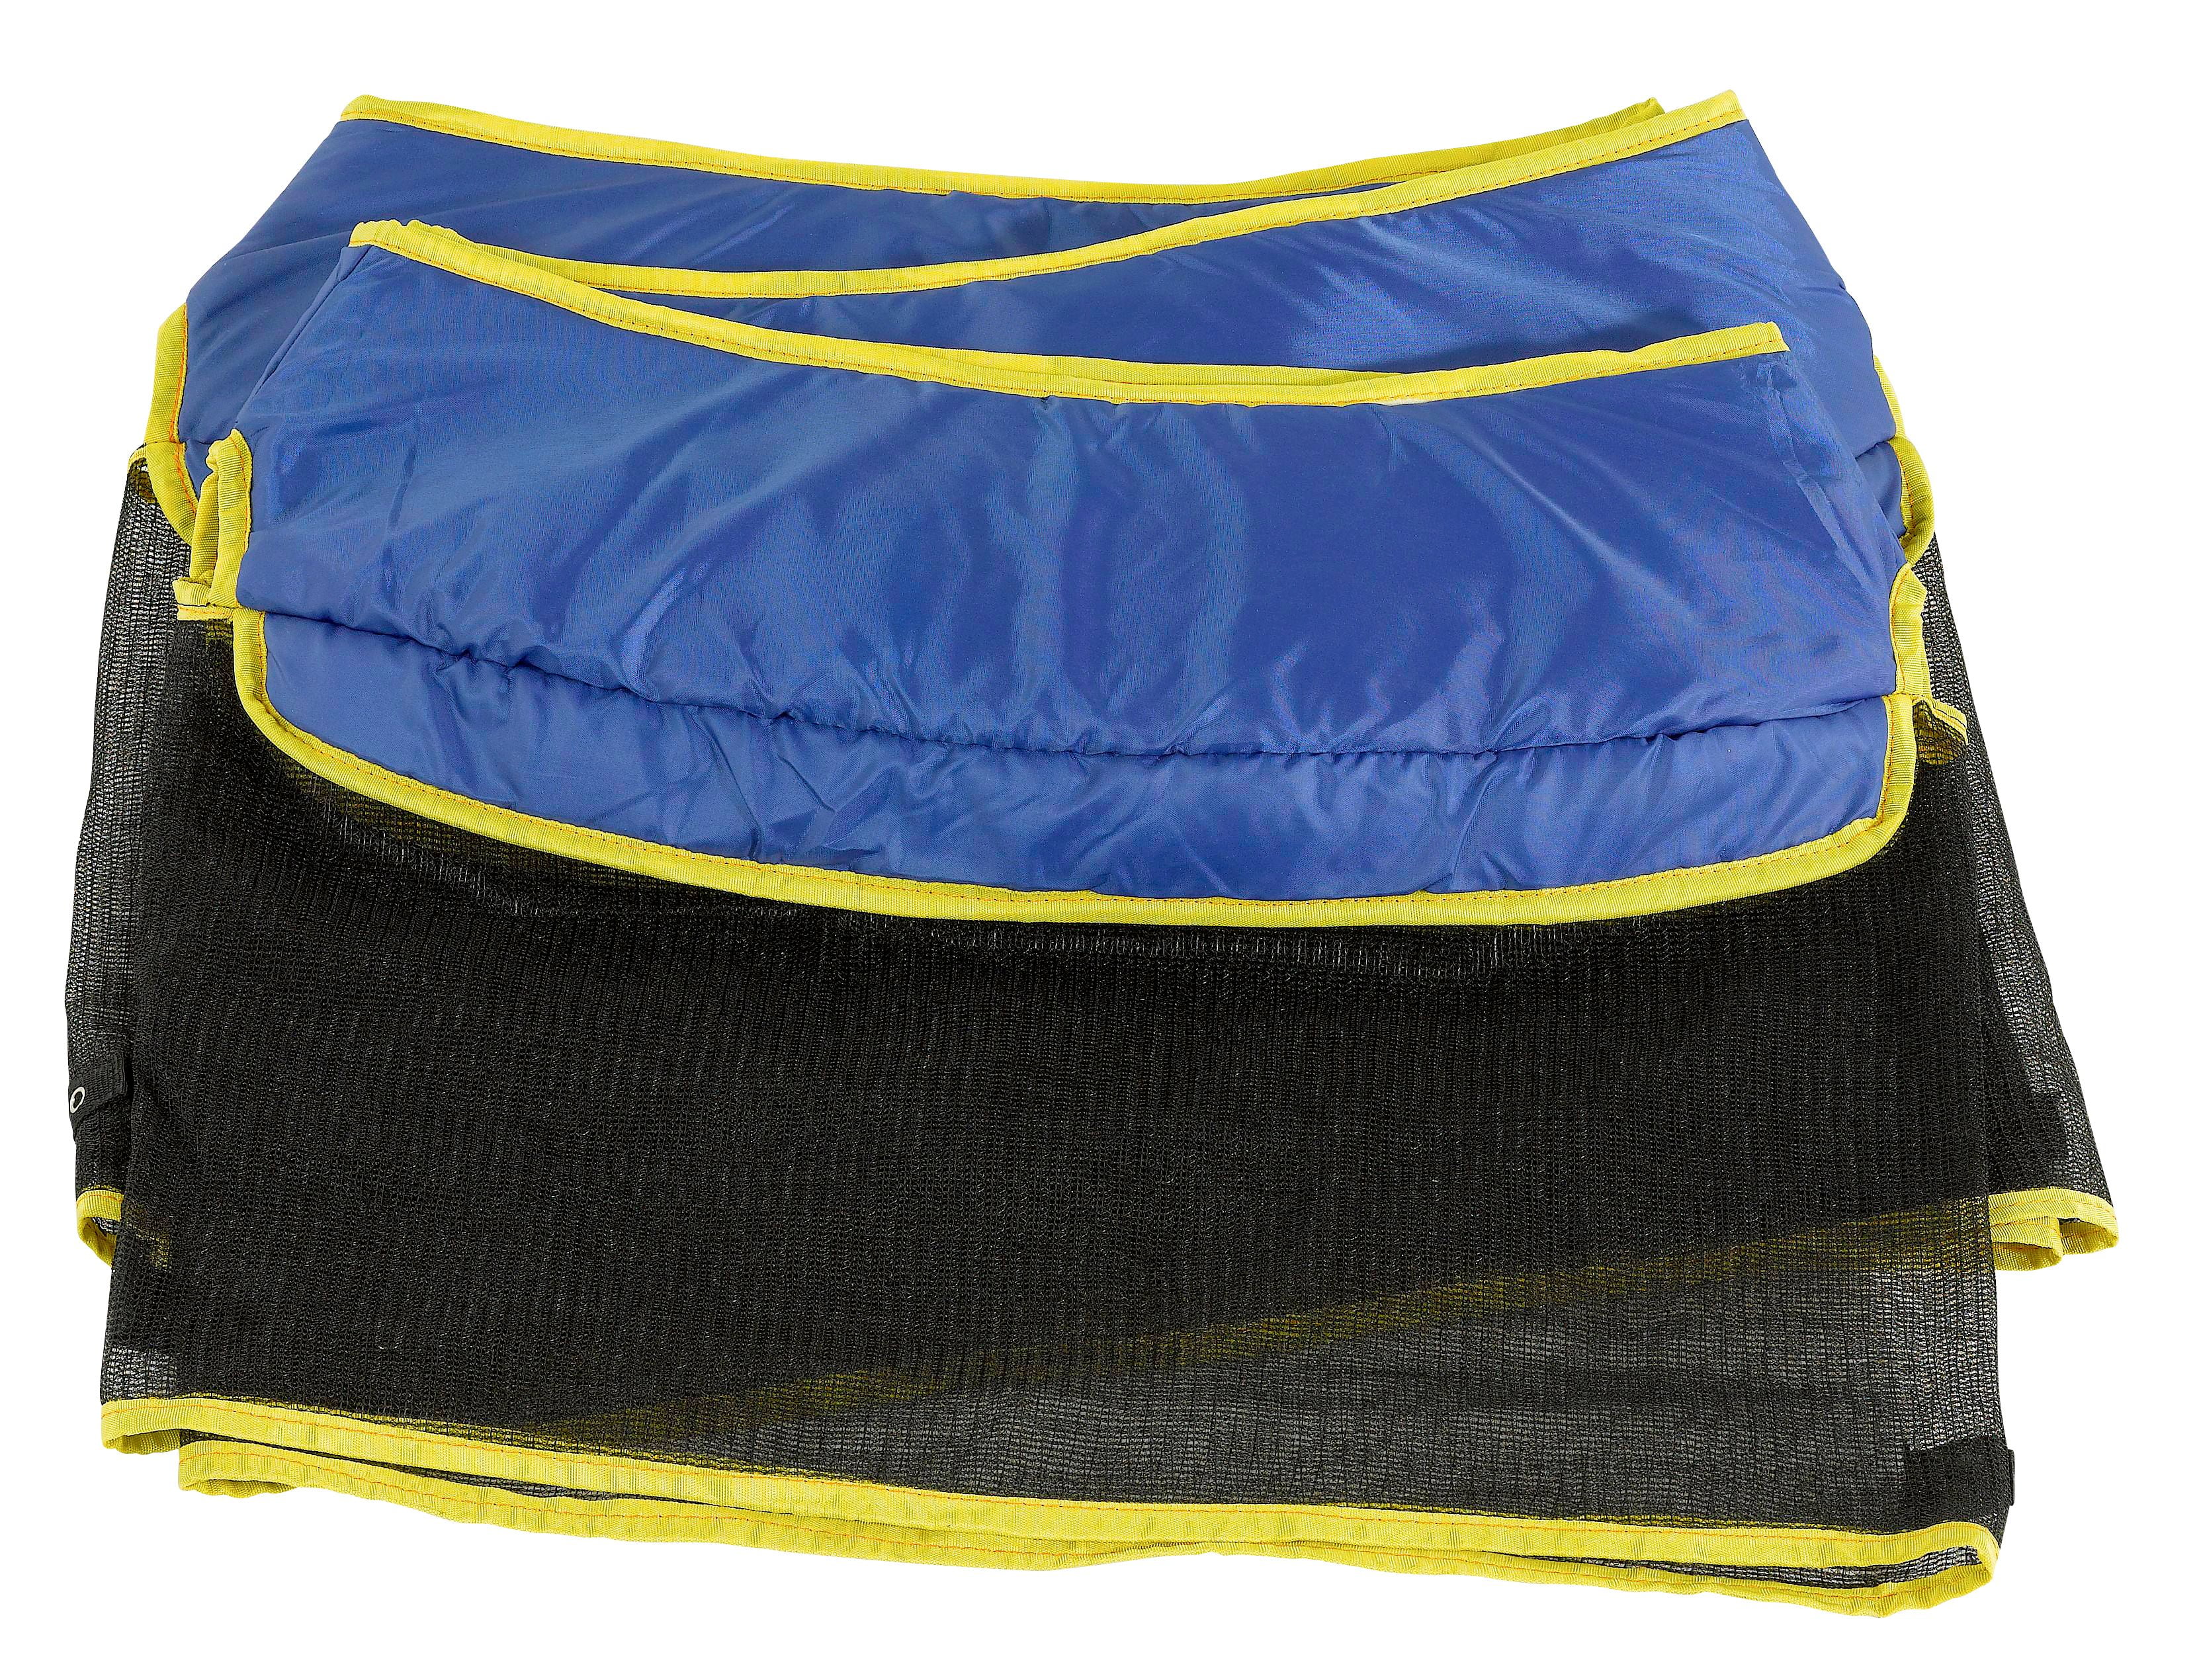 EJWQWQE Round Trampoline Patch Repair Kit To Repair Holes Or Tears On  Trampoline Mattress 